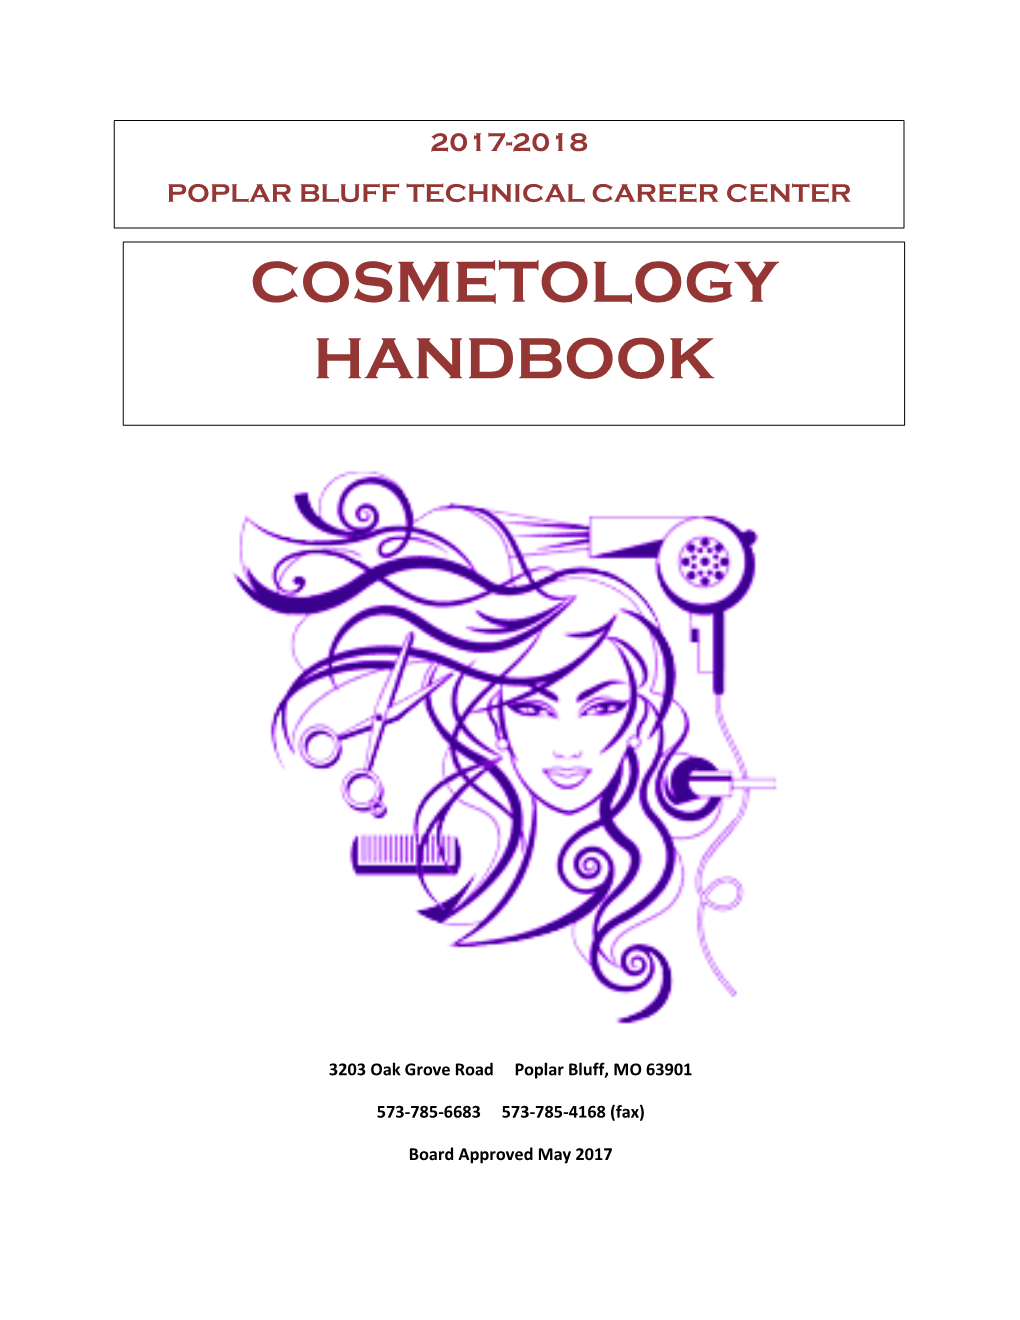 Cosmetology Handbook Also Apply to Students Enrolled and Participating in the Poplar Bluff Technical Career Center Esthetician Class